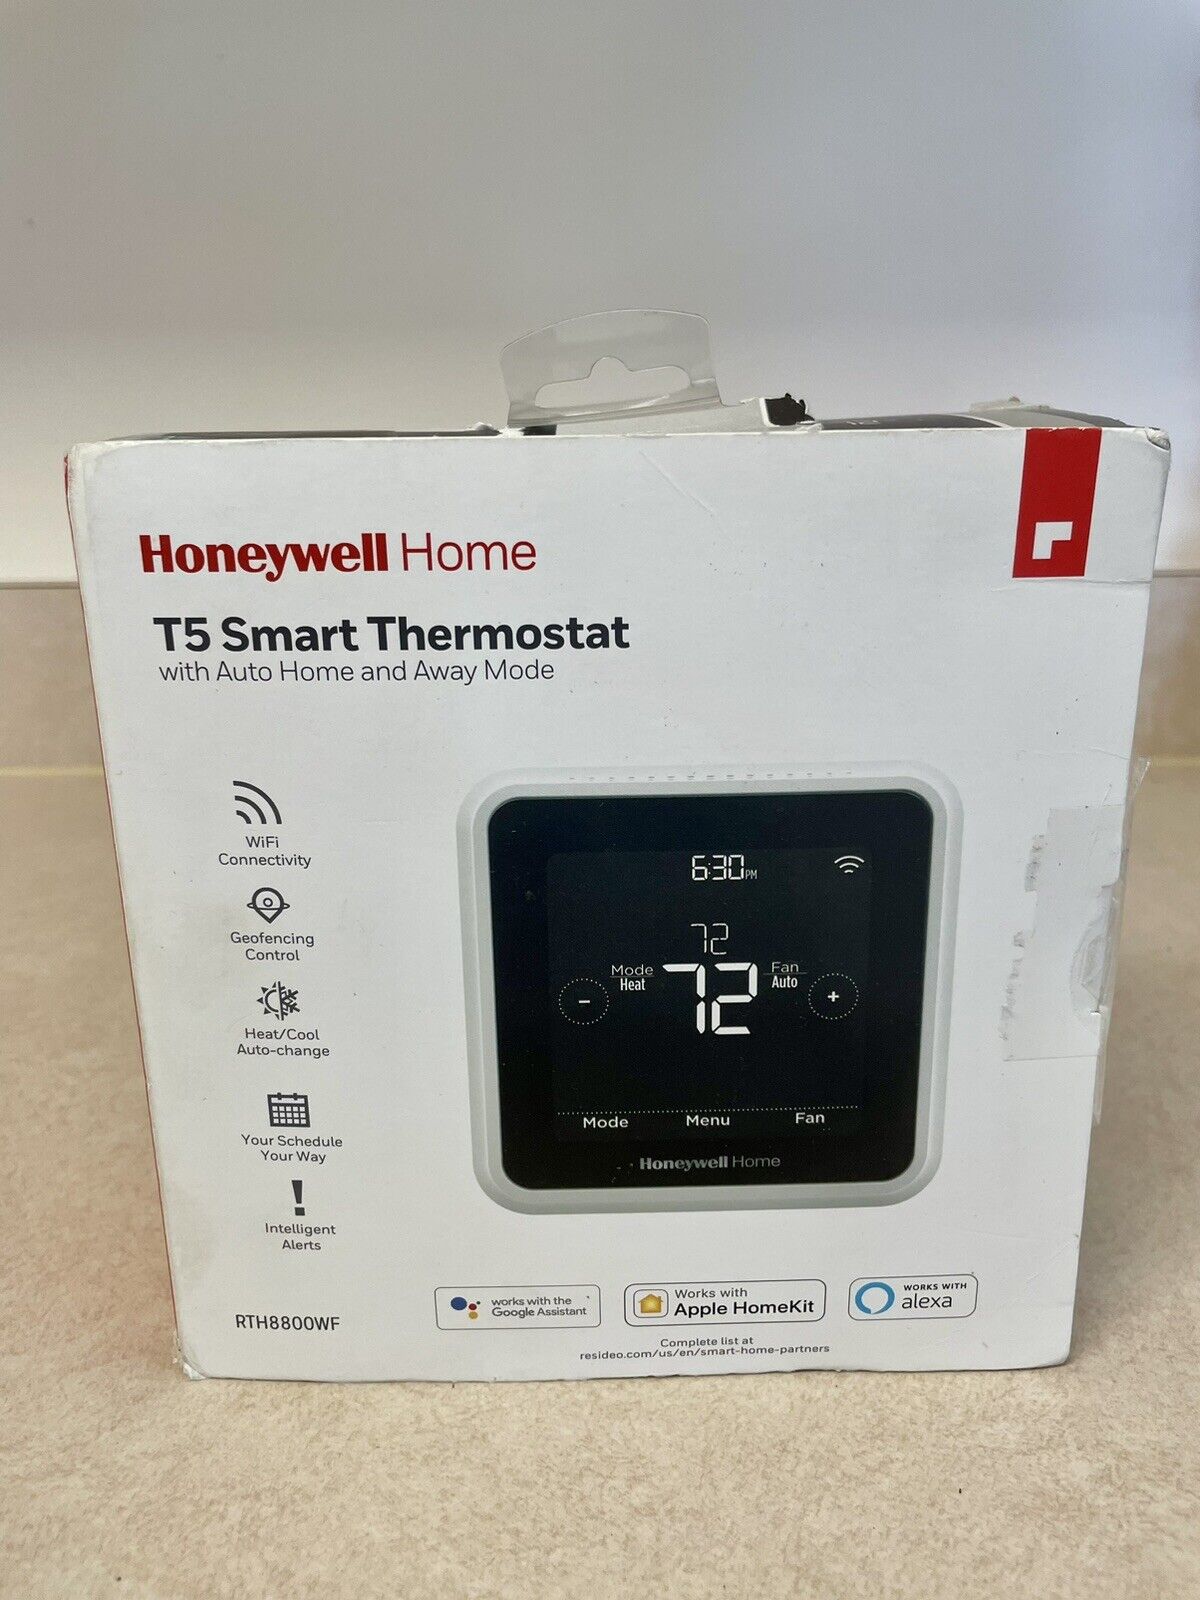 Honeywell Home T5 Smart Thermostat with Auto Home and Away Mode